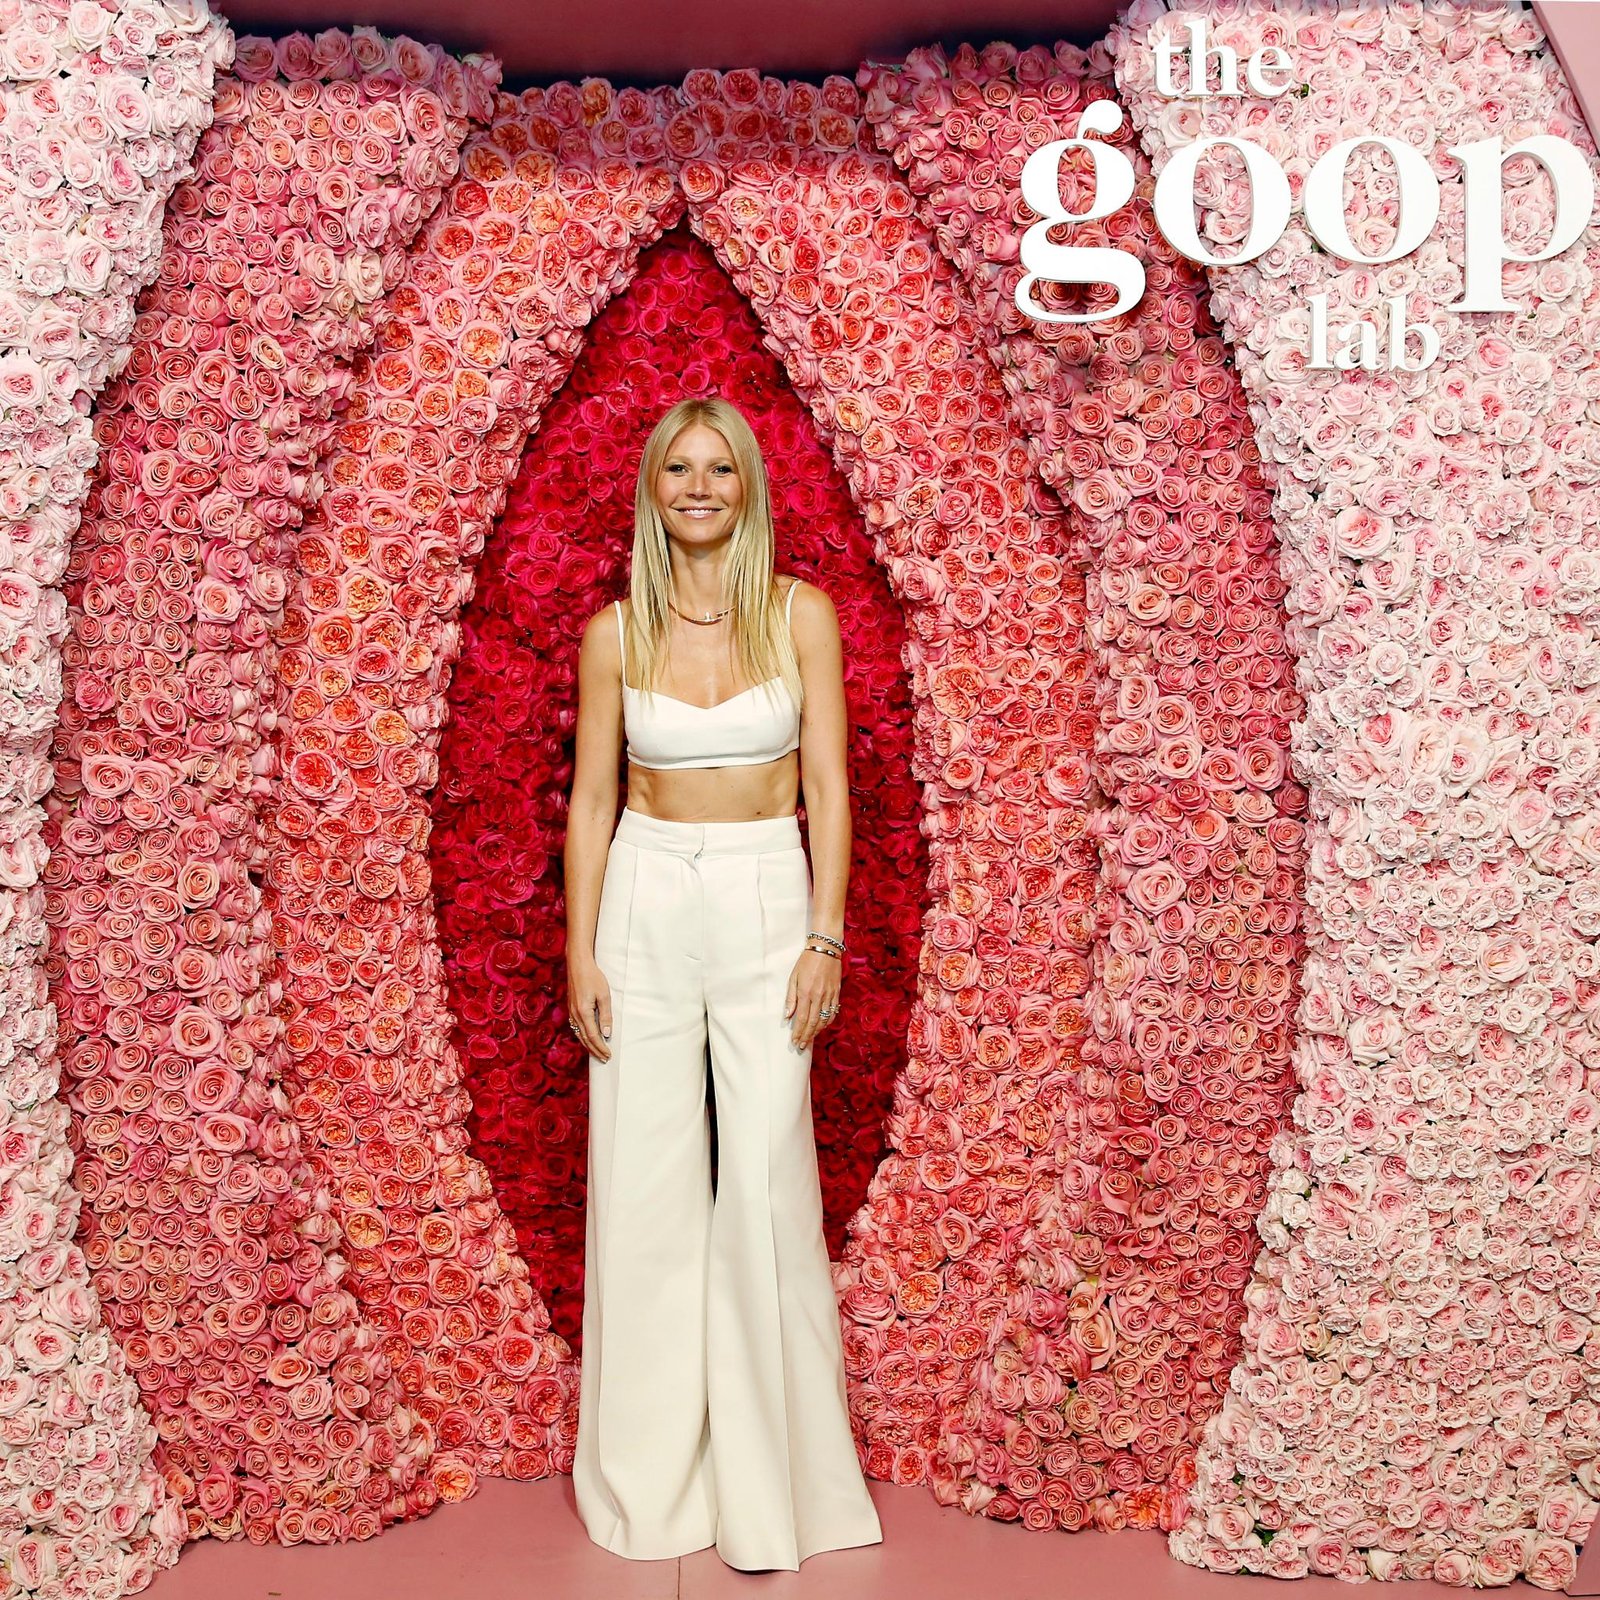 Gwyneth Paltrow in front of a Goop sign.